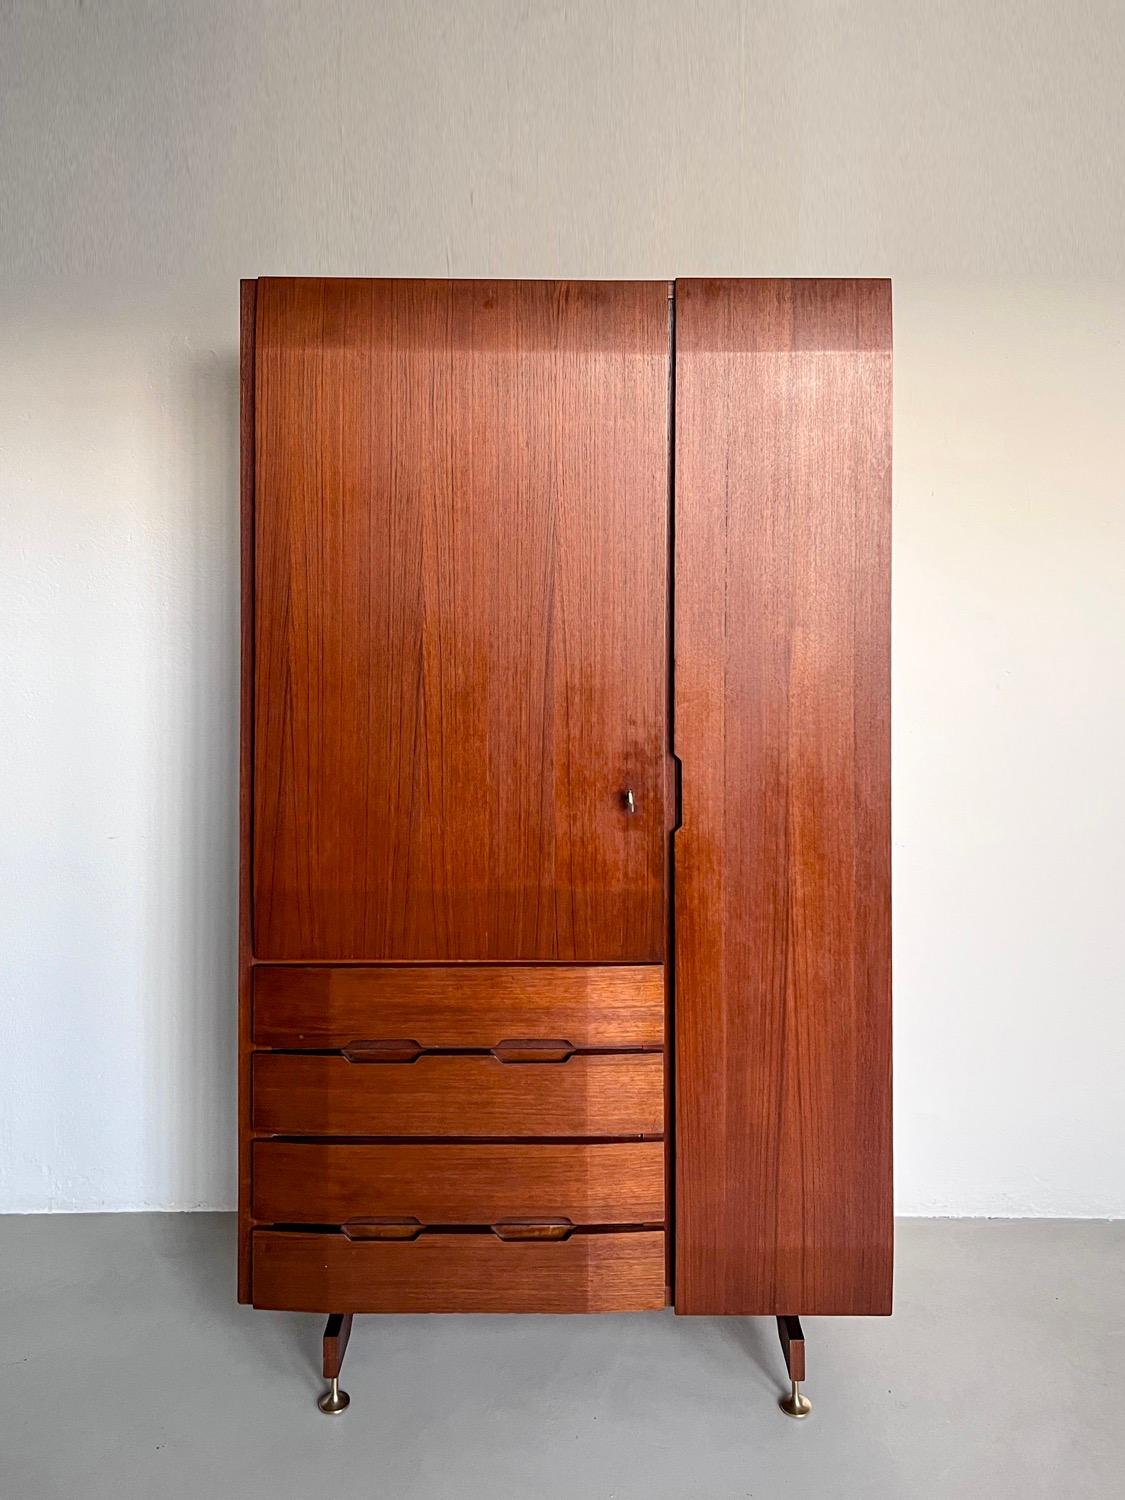 Mid-Century Modern wardrobes - Vintage Italian wood armoires - Architectural Walnut Cabinets

Presented for sale is a beautiful and attractive set of two matching wardrobes, made in Italy in the 1950s and extremely well manufactured out of walnut.